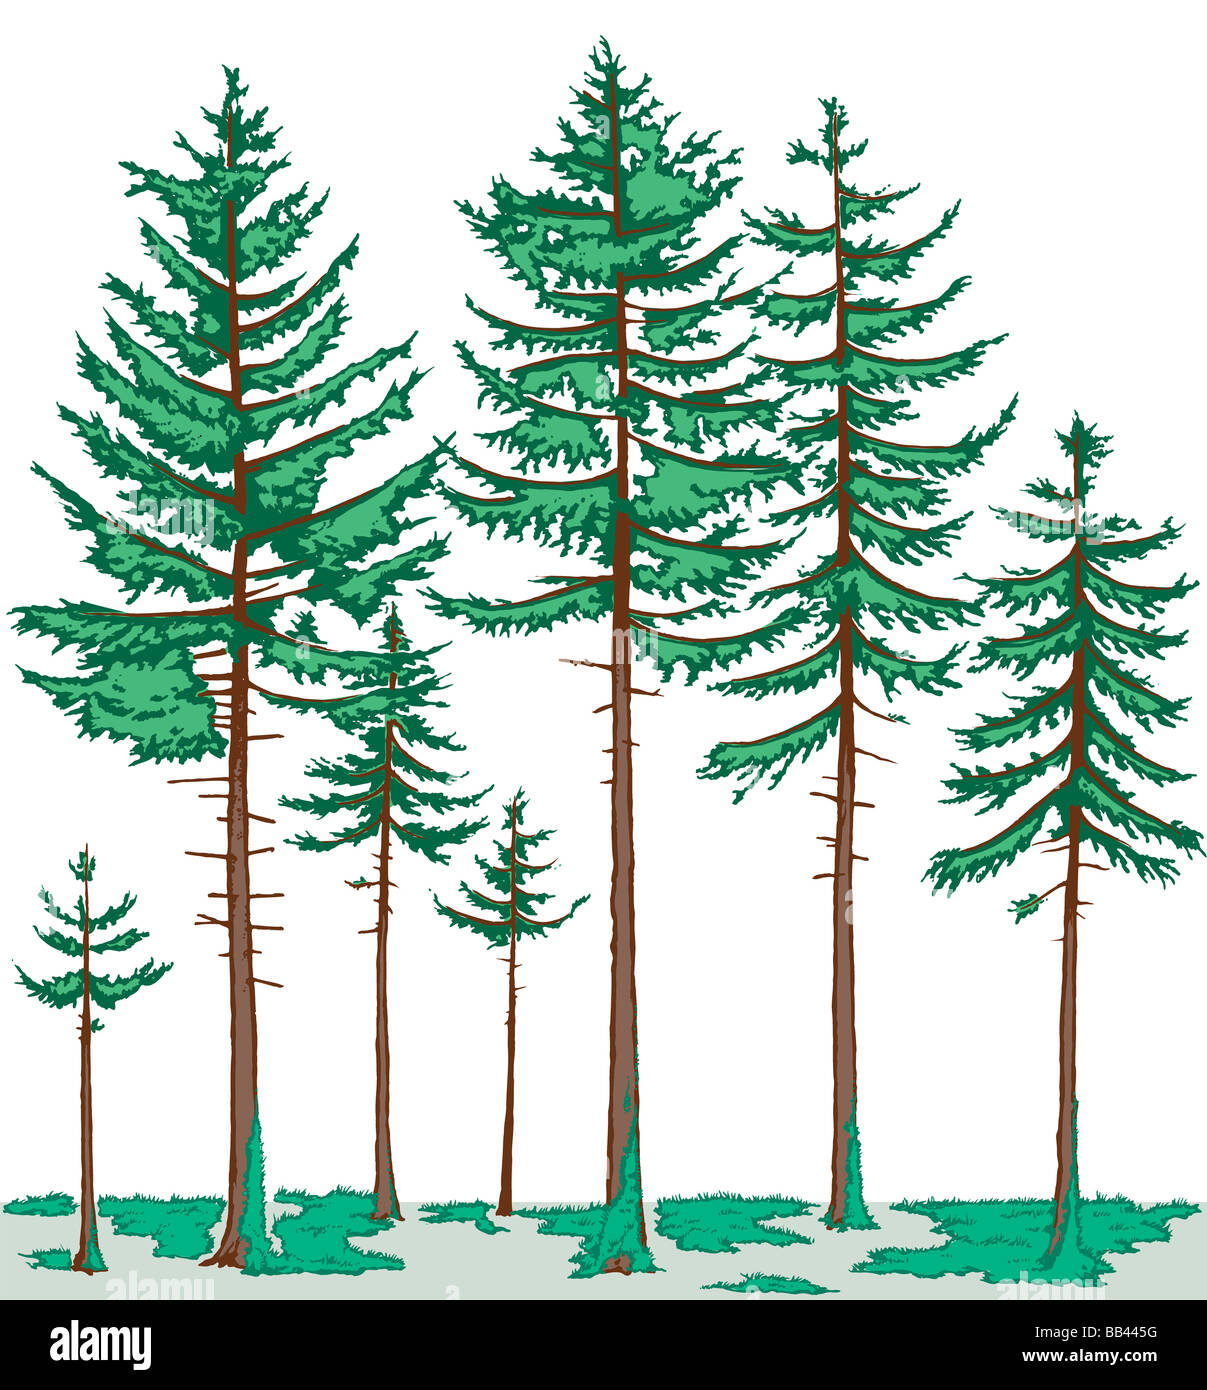 Vegetation profile of a boreal forest. The tree layer consists mainly of conifers, and mosses are the predominant ground cover. Stock Photo